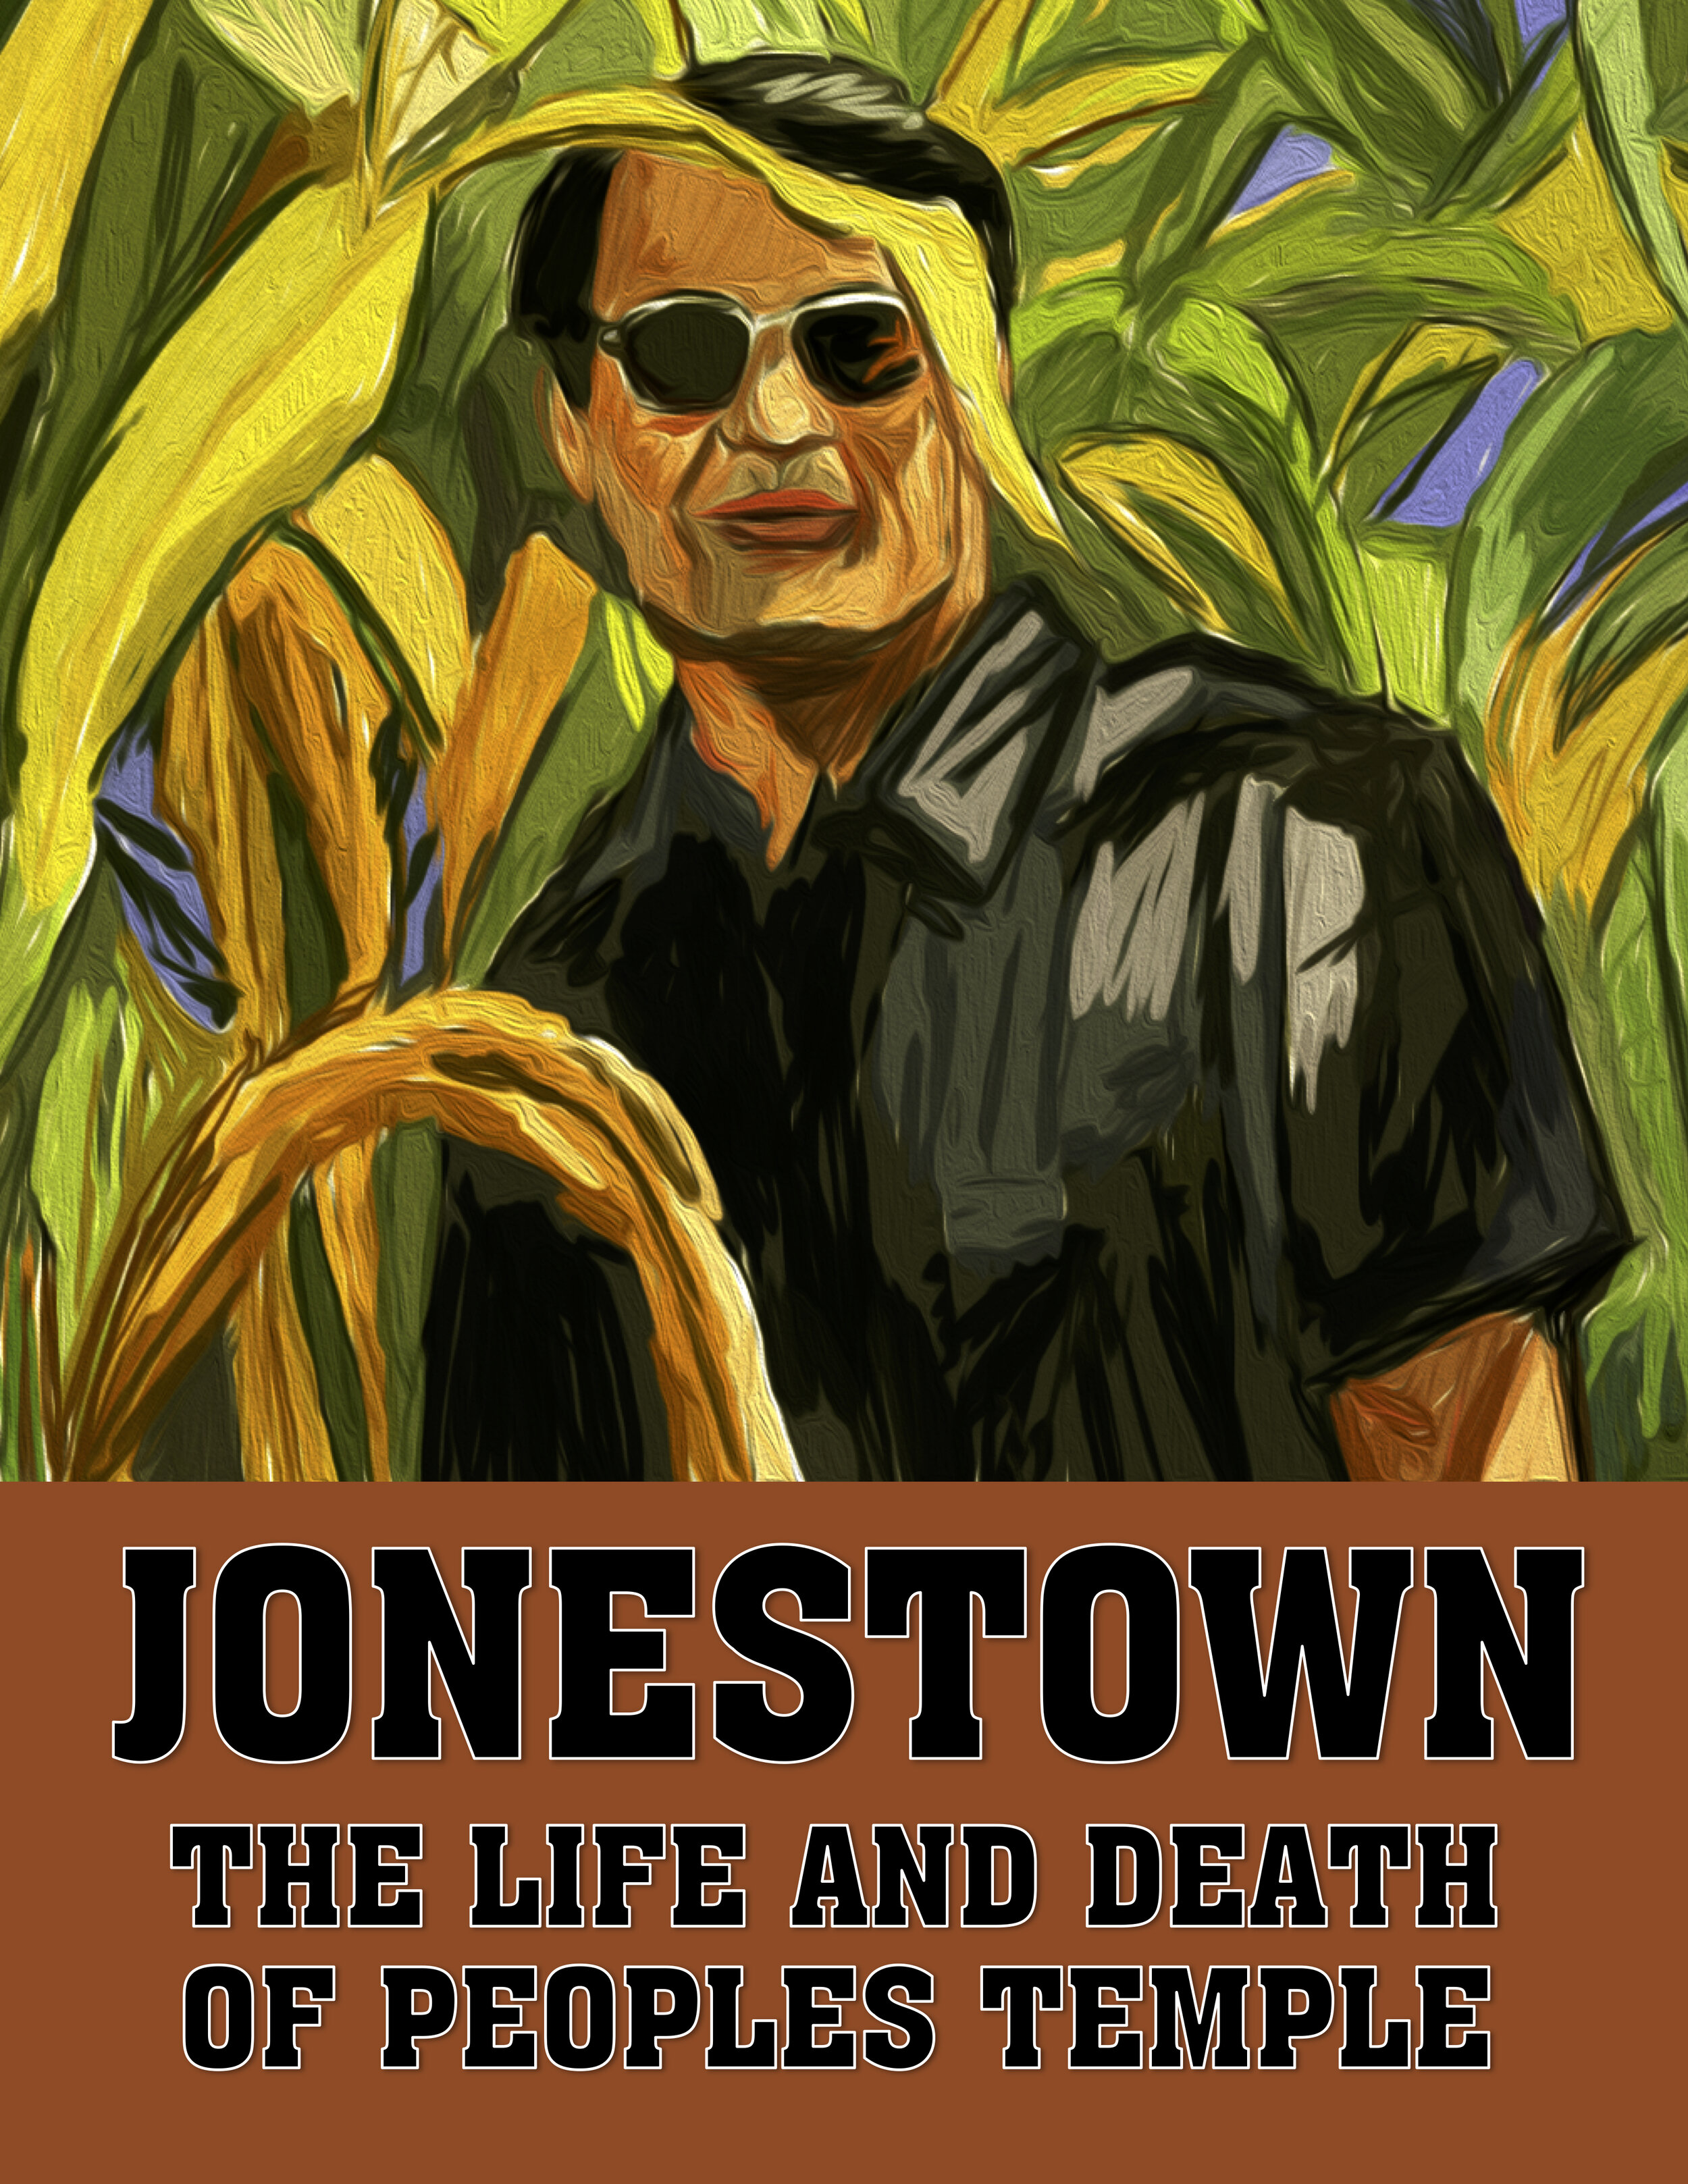 Jonestown: The Life and Death of Peoples Temple (2006)